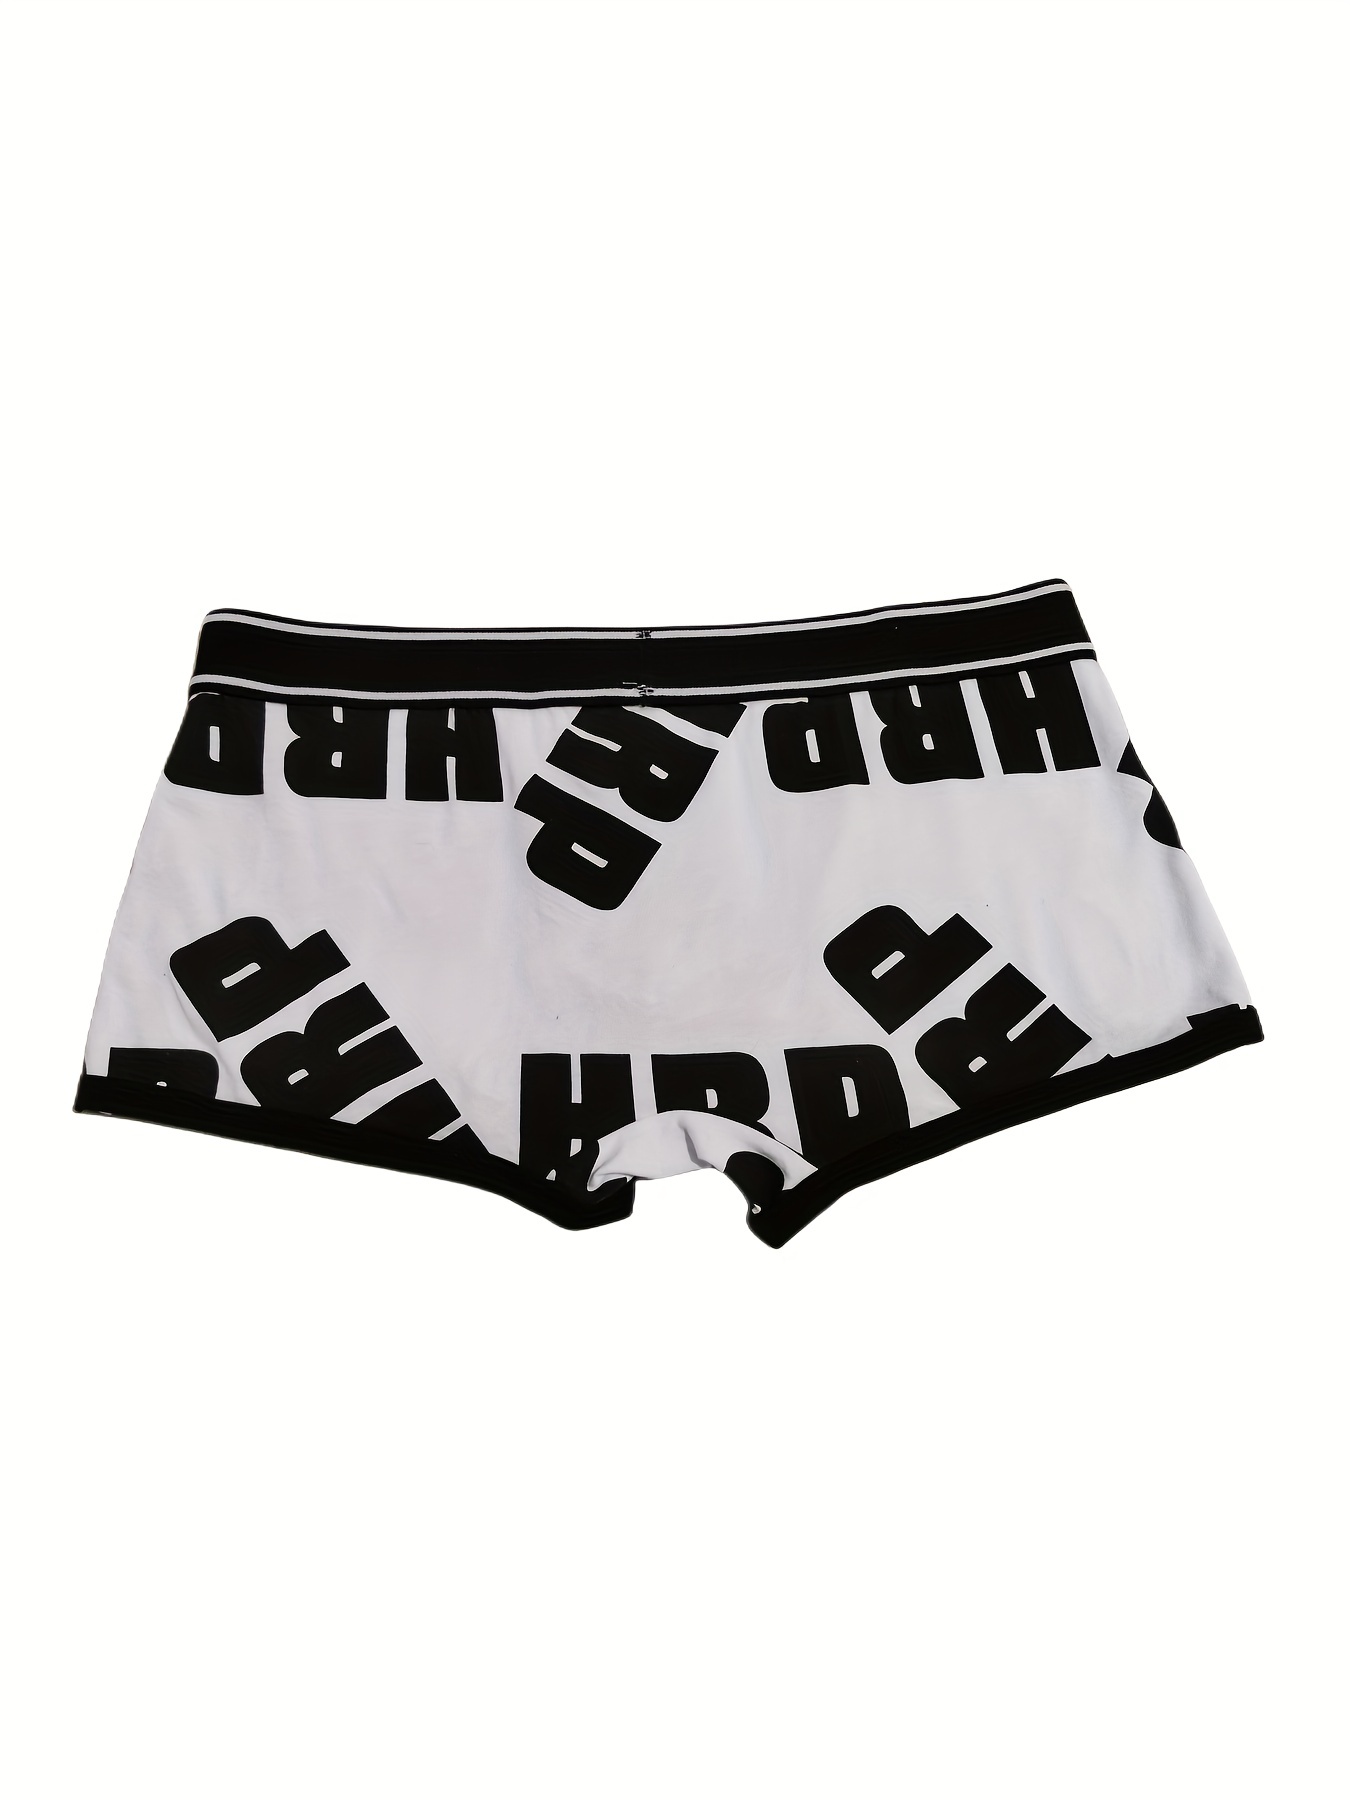 Men's Underwear Four Cornered Breathable Boxer Shorts For Sports